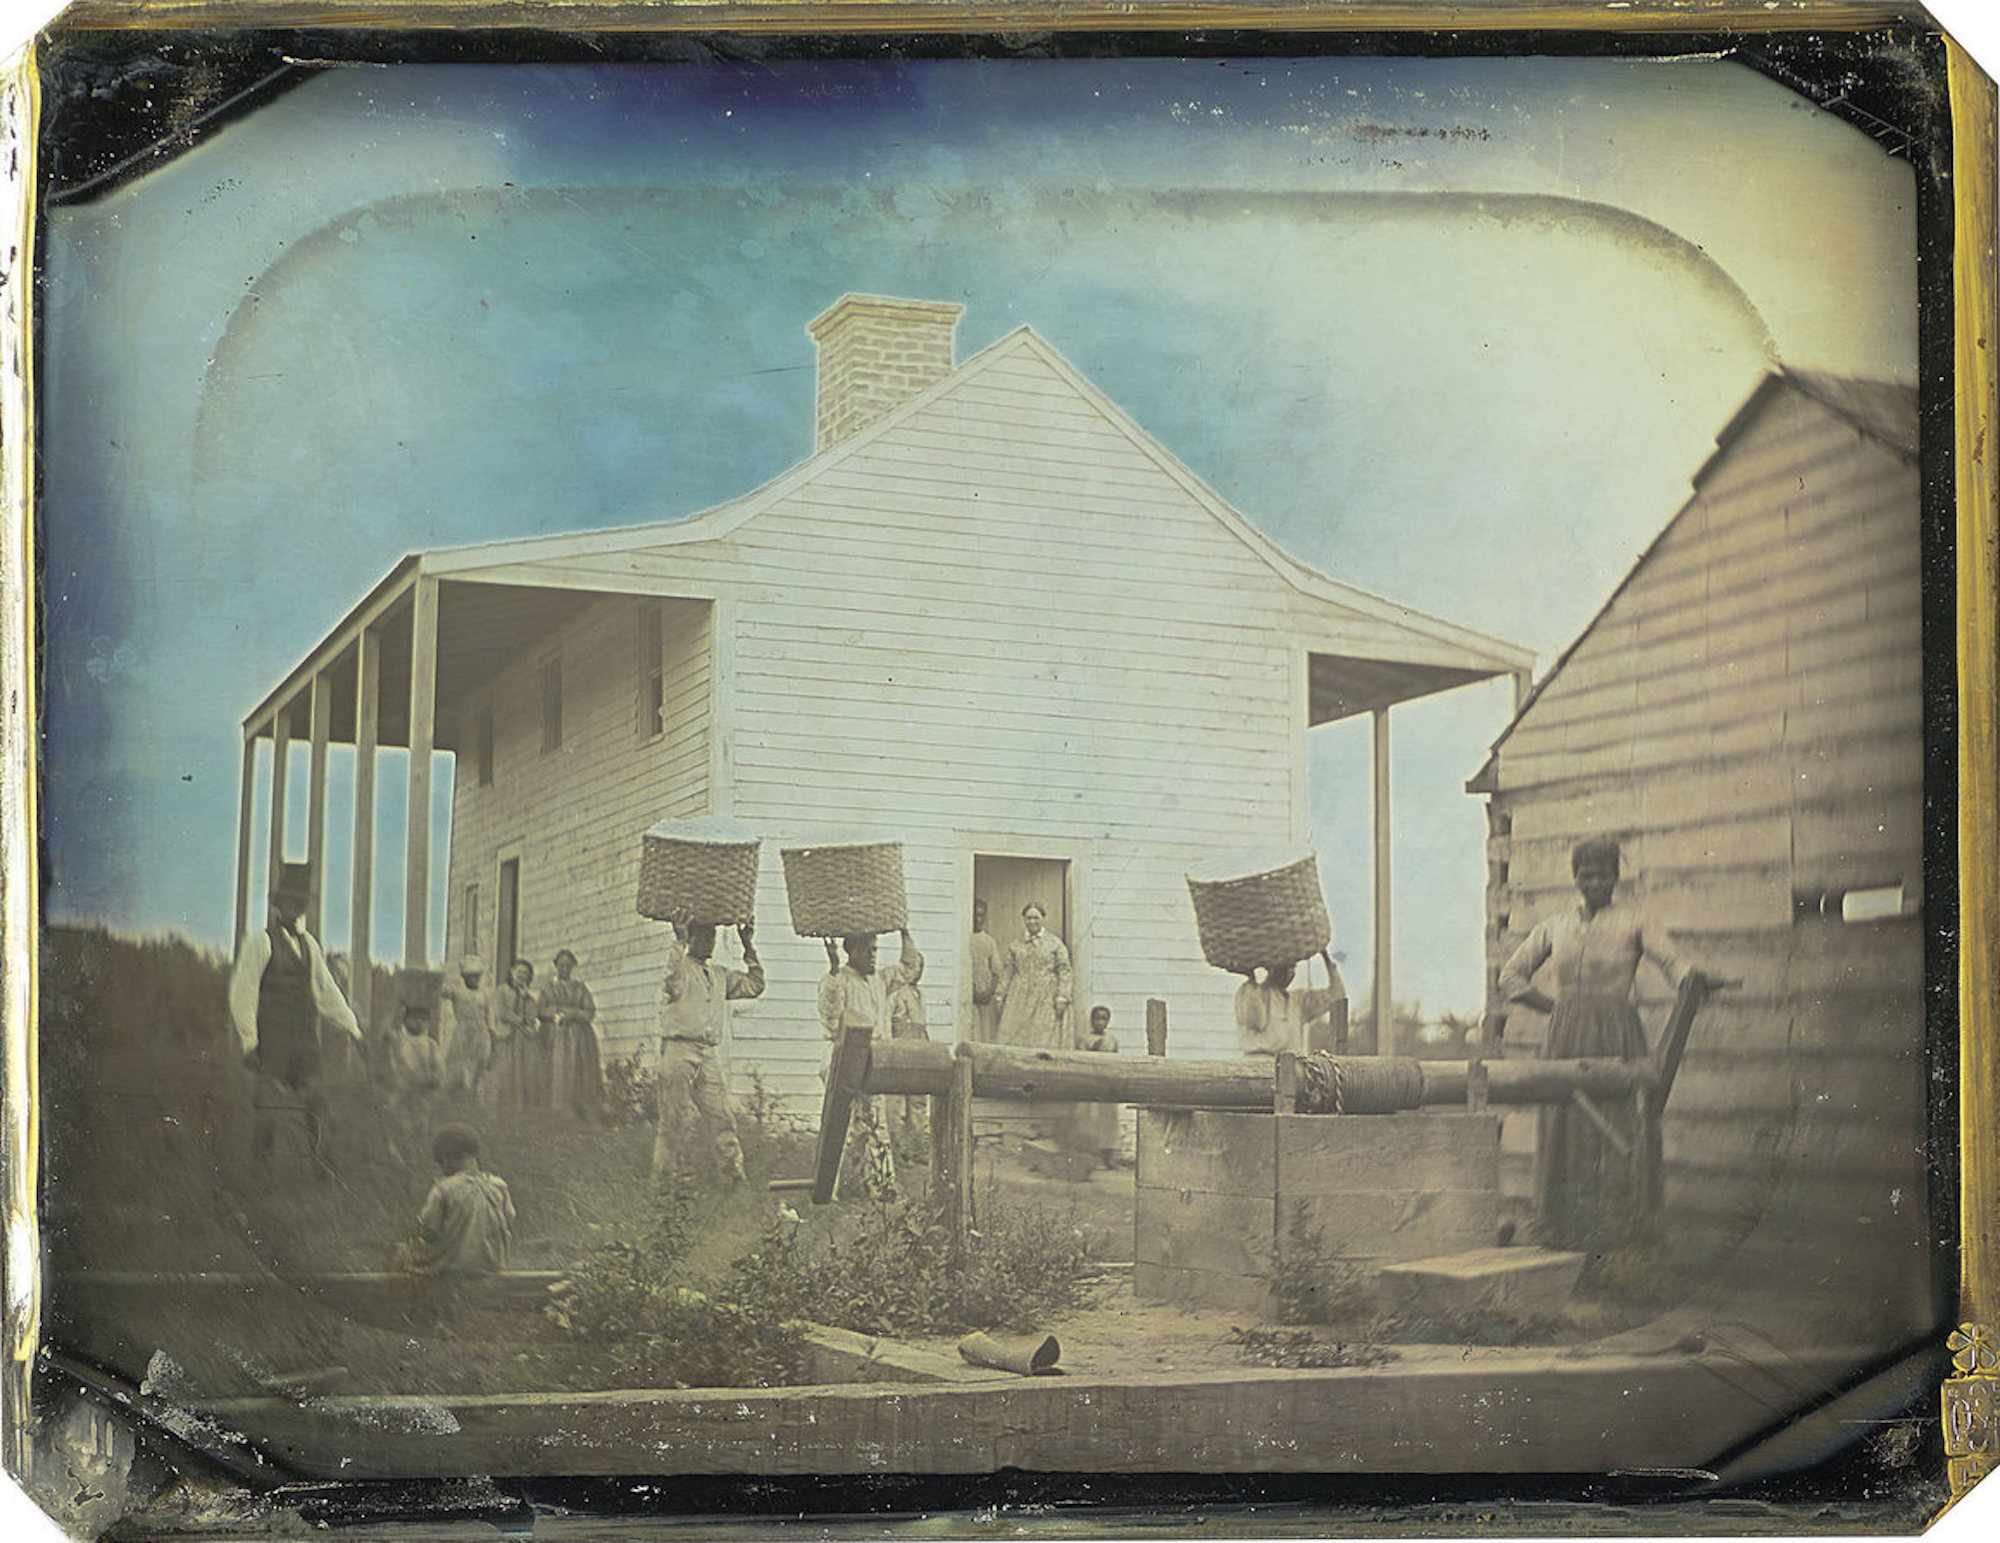 Found: The Oldest-Known Photograph of Enslaved African Americans With Cotton | Atlas Obscura